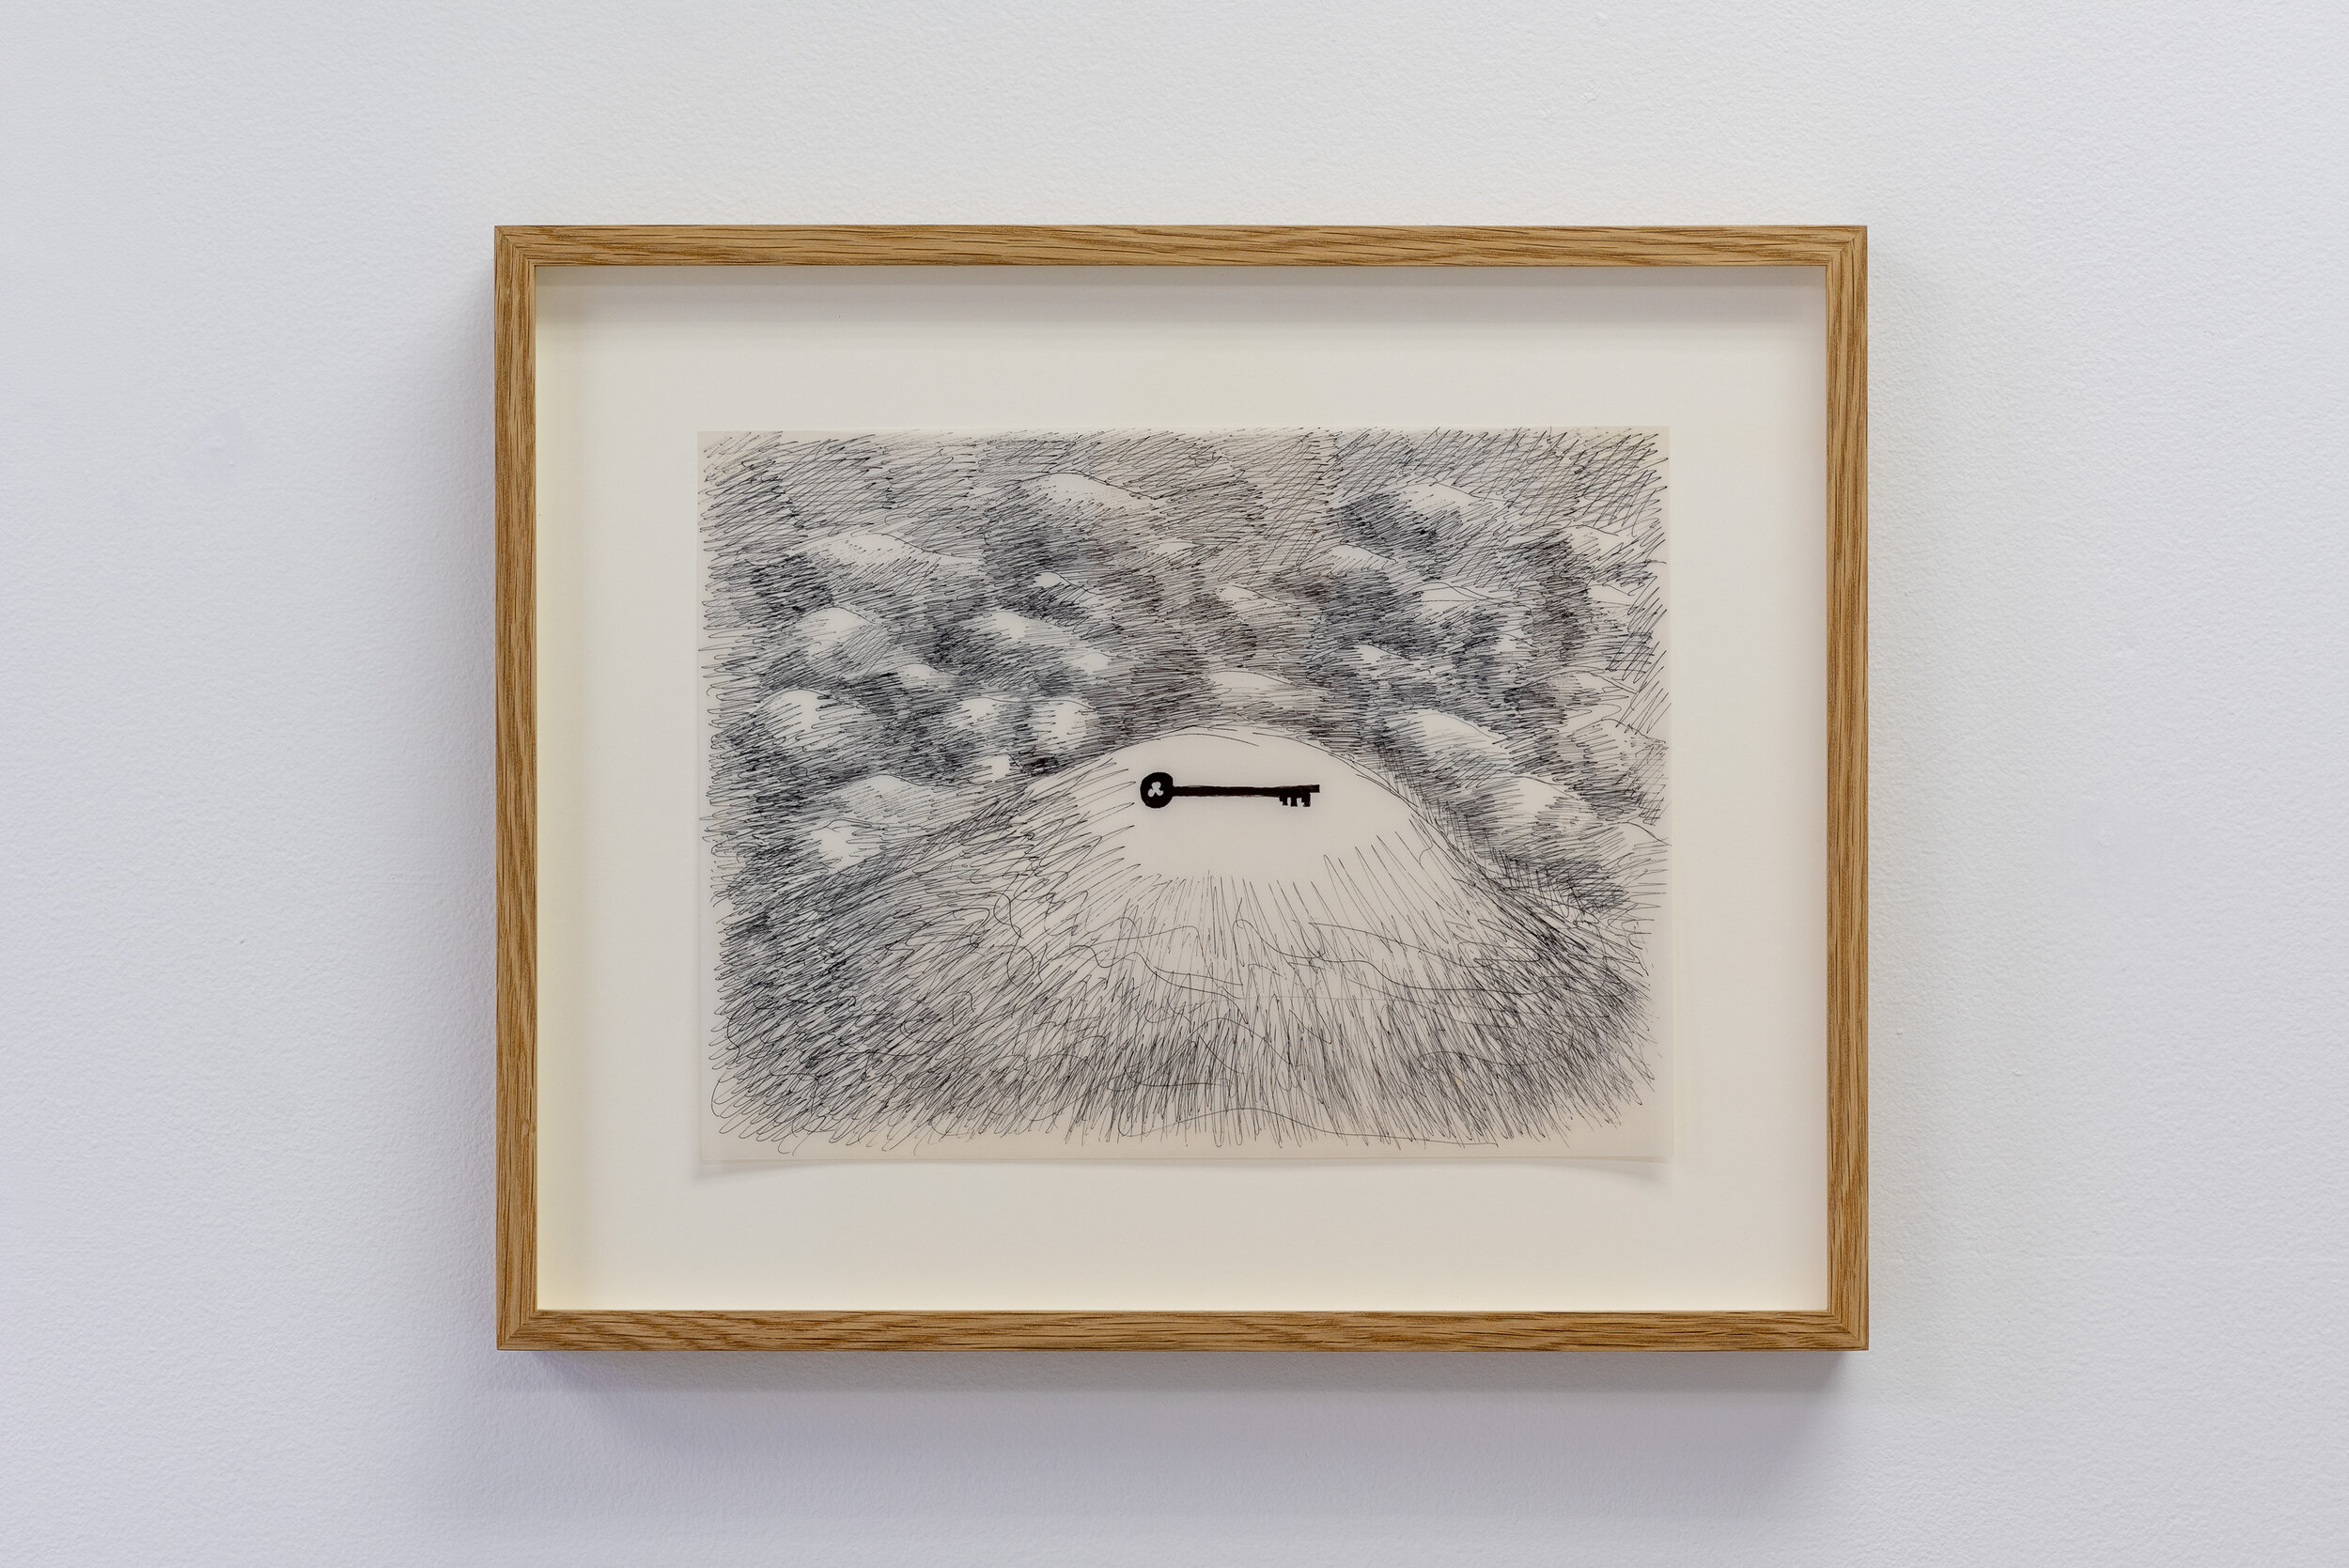  Stephane Gaulin-Brown, ​ Mountain Meaning's Key,  ​ink on vellum, 2018  